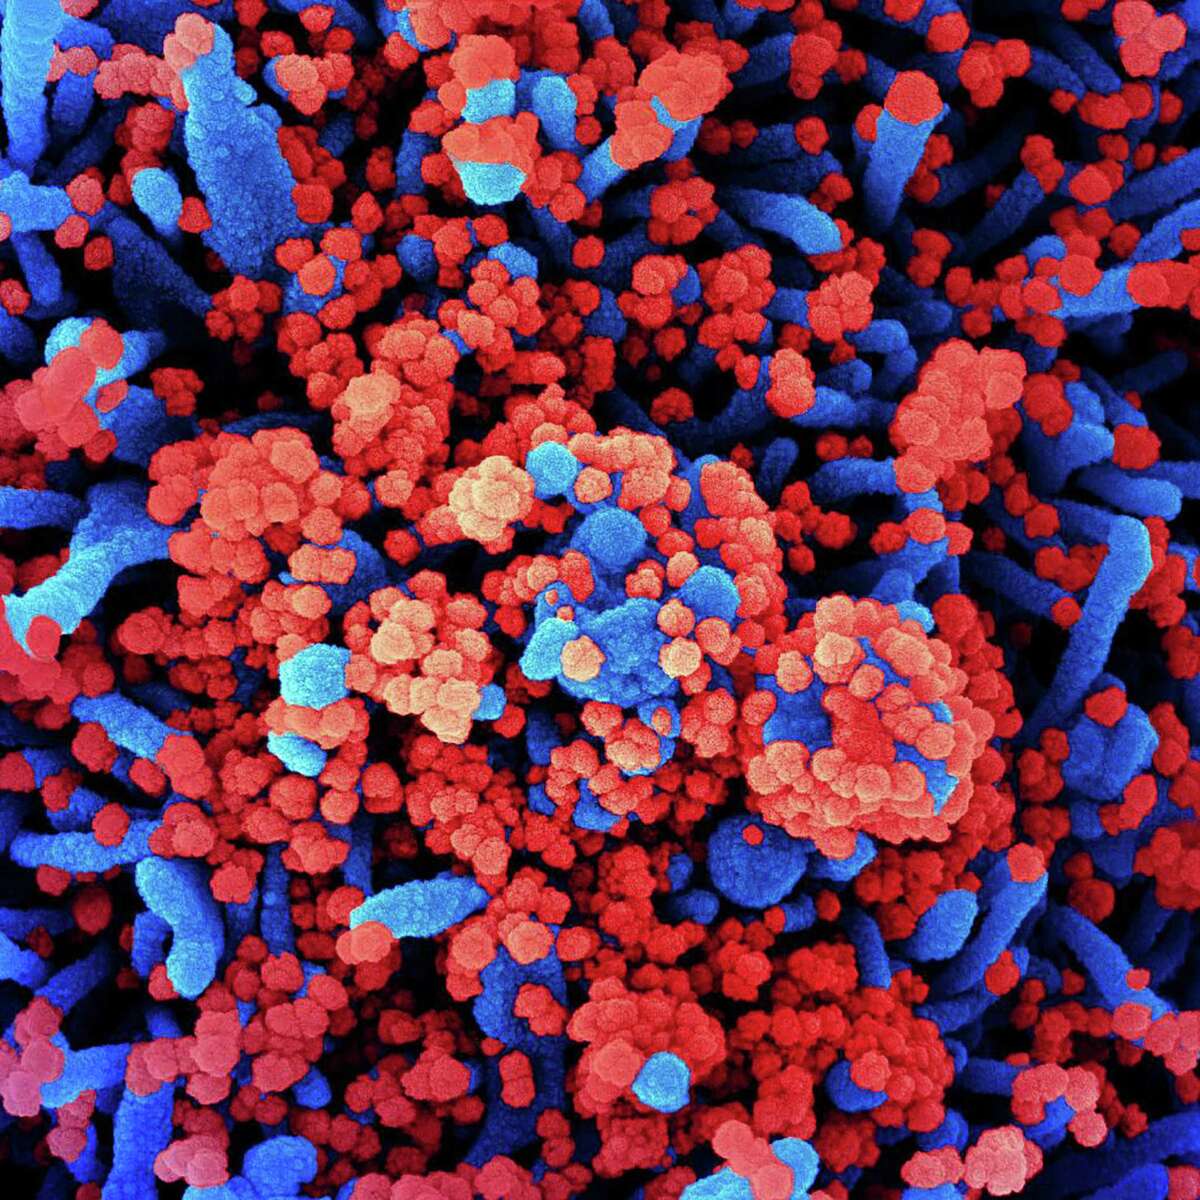 This undated handout image obtained July 28, 2020, courtesy of National Institute of Allergy and Infectious Diseases(NIH/NIAID), shows a colorized scanning electron micrograph of a cell (blue) heavily infected with SARS-CoV-2 virus particles (red), isolated from a patient sample. (Photo by - / National Institute of Allergy and Infectious Diseases / AFP) / RESTRICTED TO EDITORIAL USE - MANDATORY CREDIT "AFP PHOTO /NATIONAL INSTITUTE OF ALLERGY AND INFECTIOUS DISEASES/HANDOUT " - NO MARKETING - NO ADVERTISING CAMPAIGNS - DISTRIBUTED AS A SERVICE TO CLIENTS (Photo by -/National Institute of Allergy an/AFP via Getty Images)